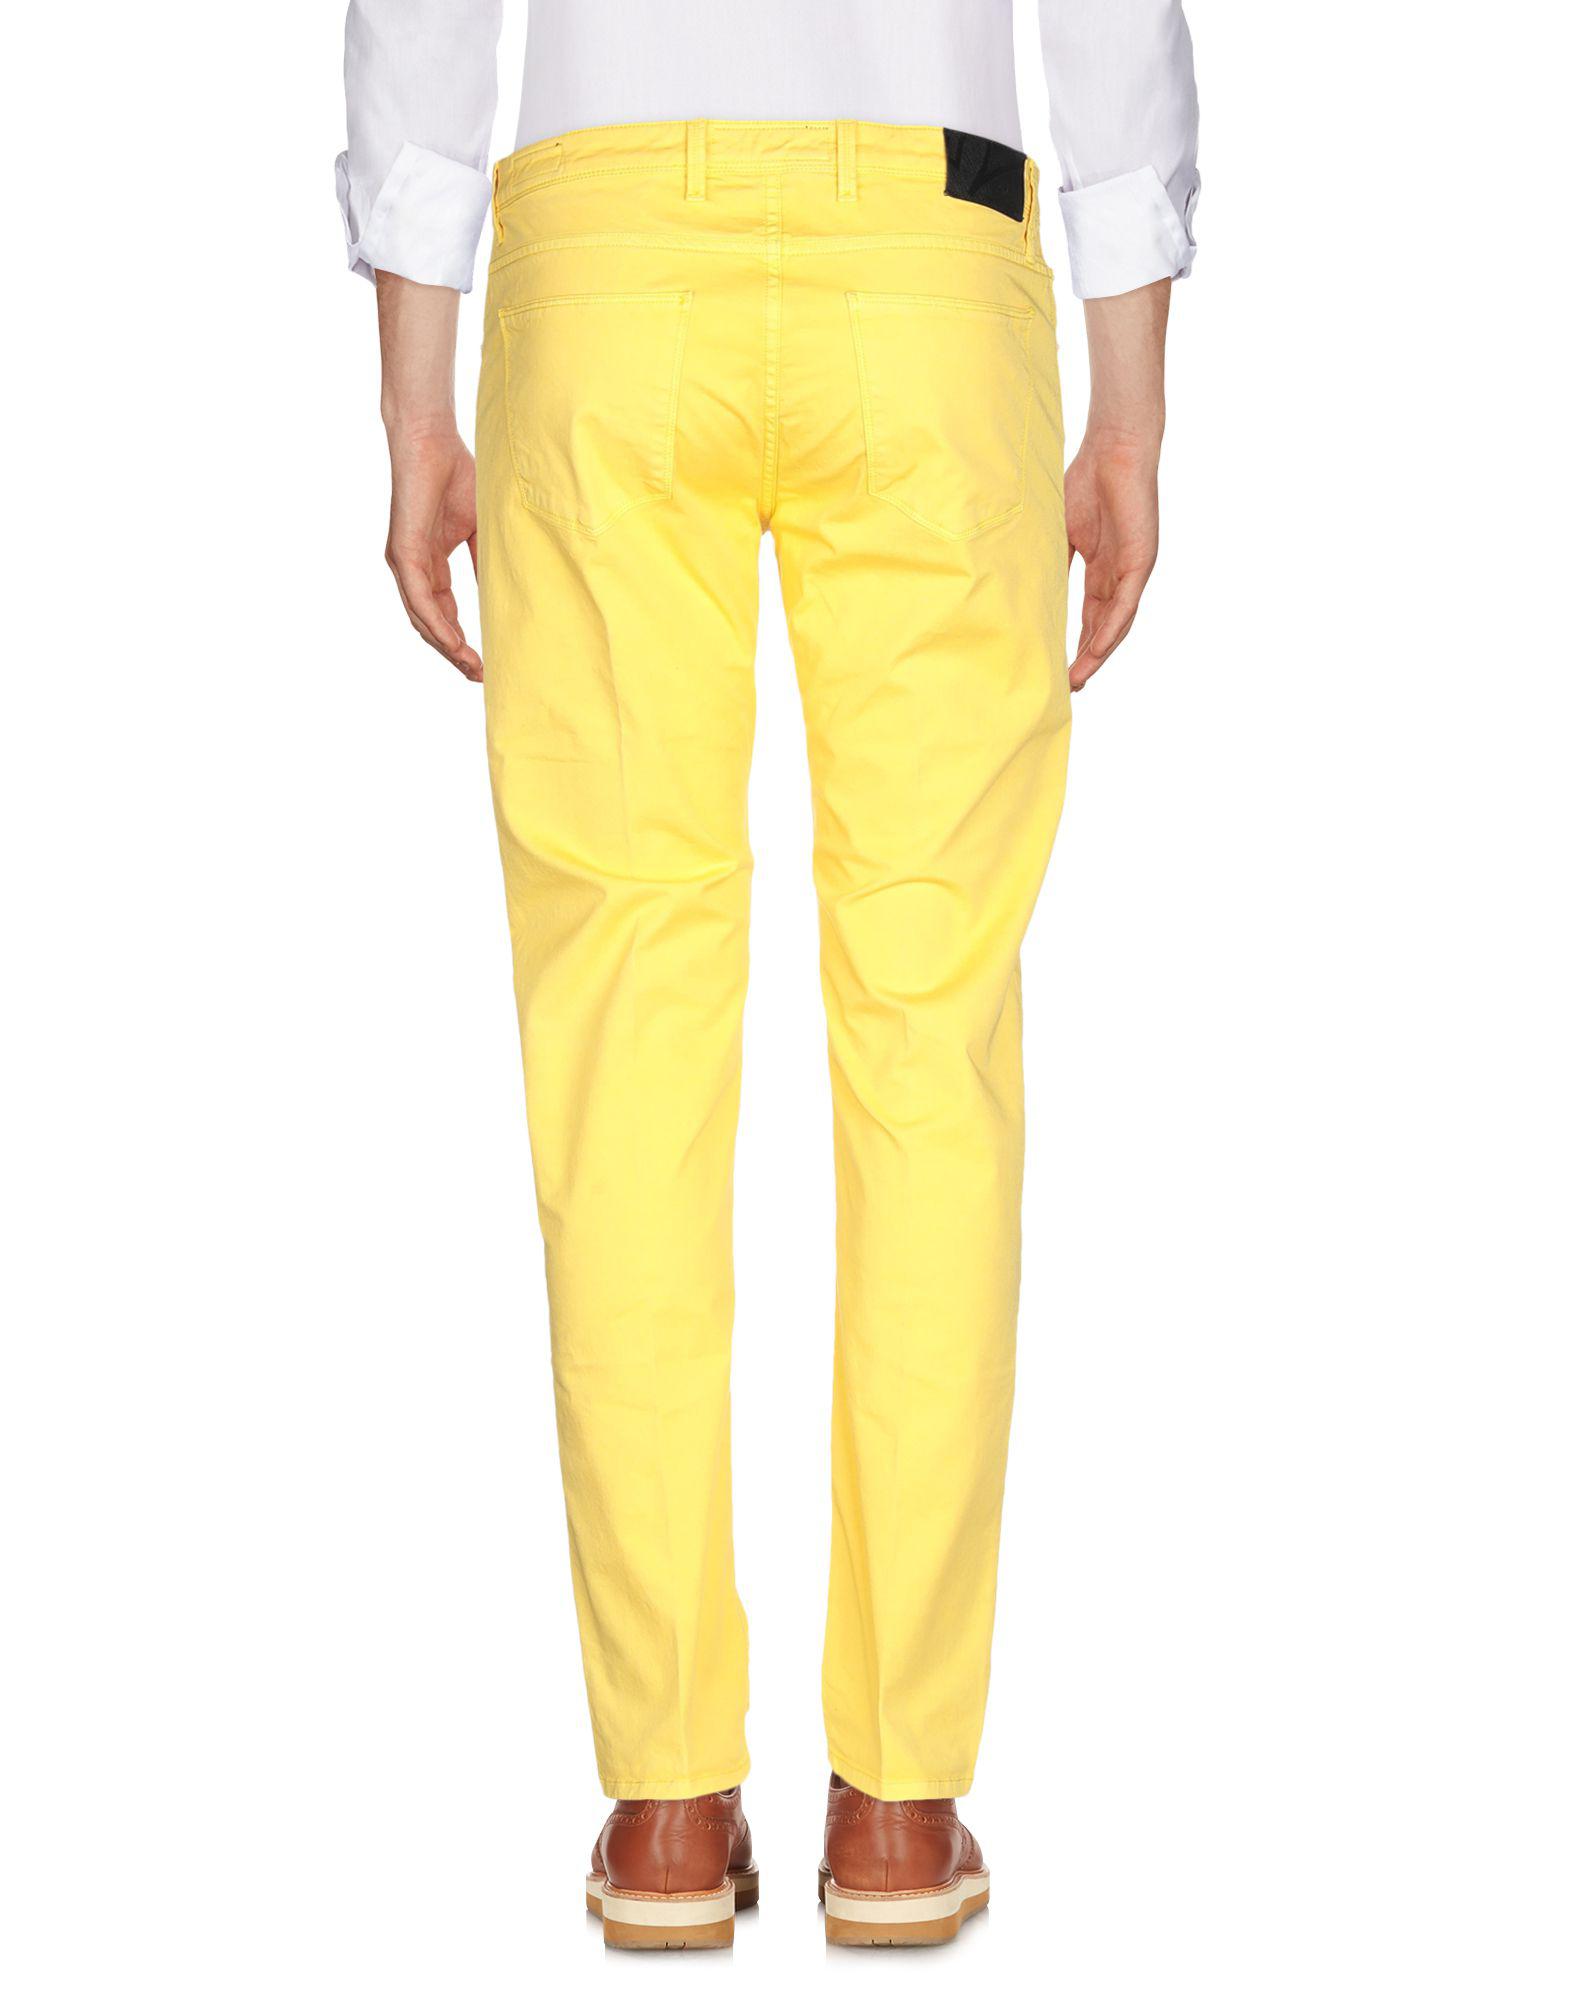 Pt05 Casual Trouser in Yellow for Men - Lyst